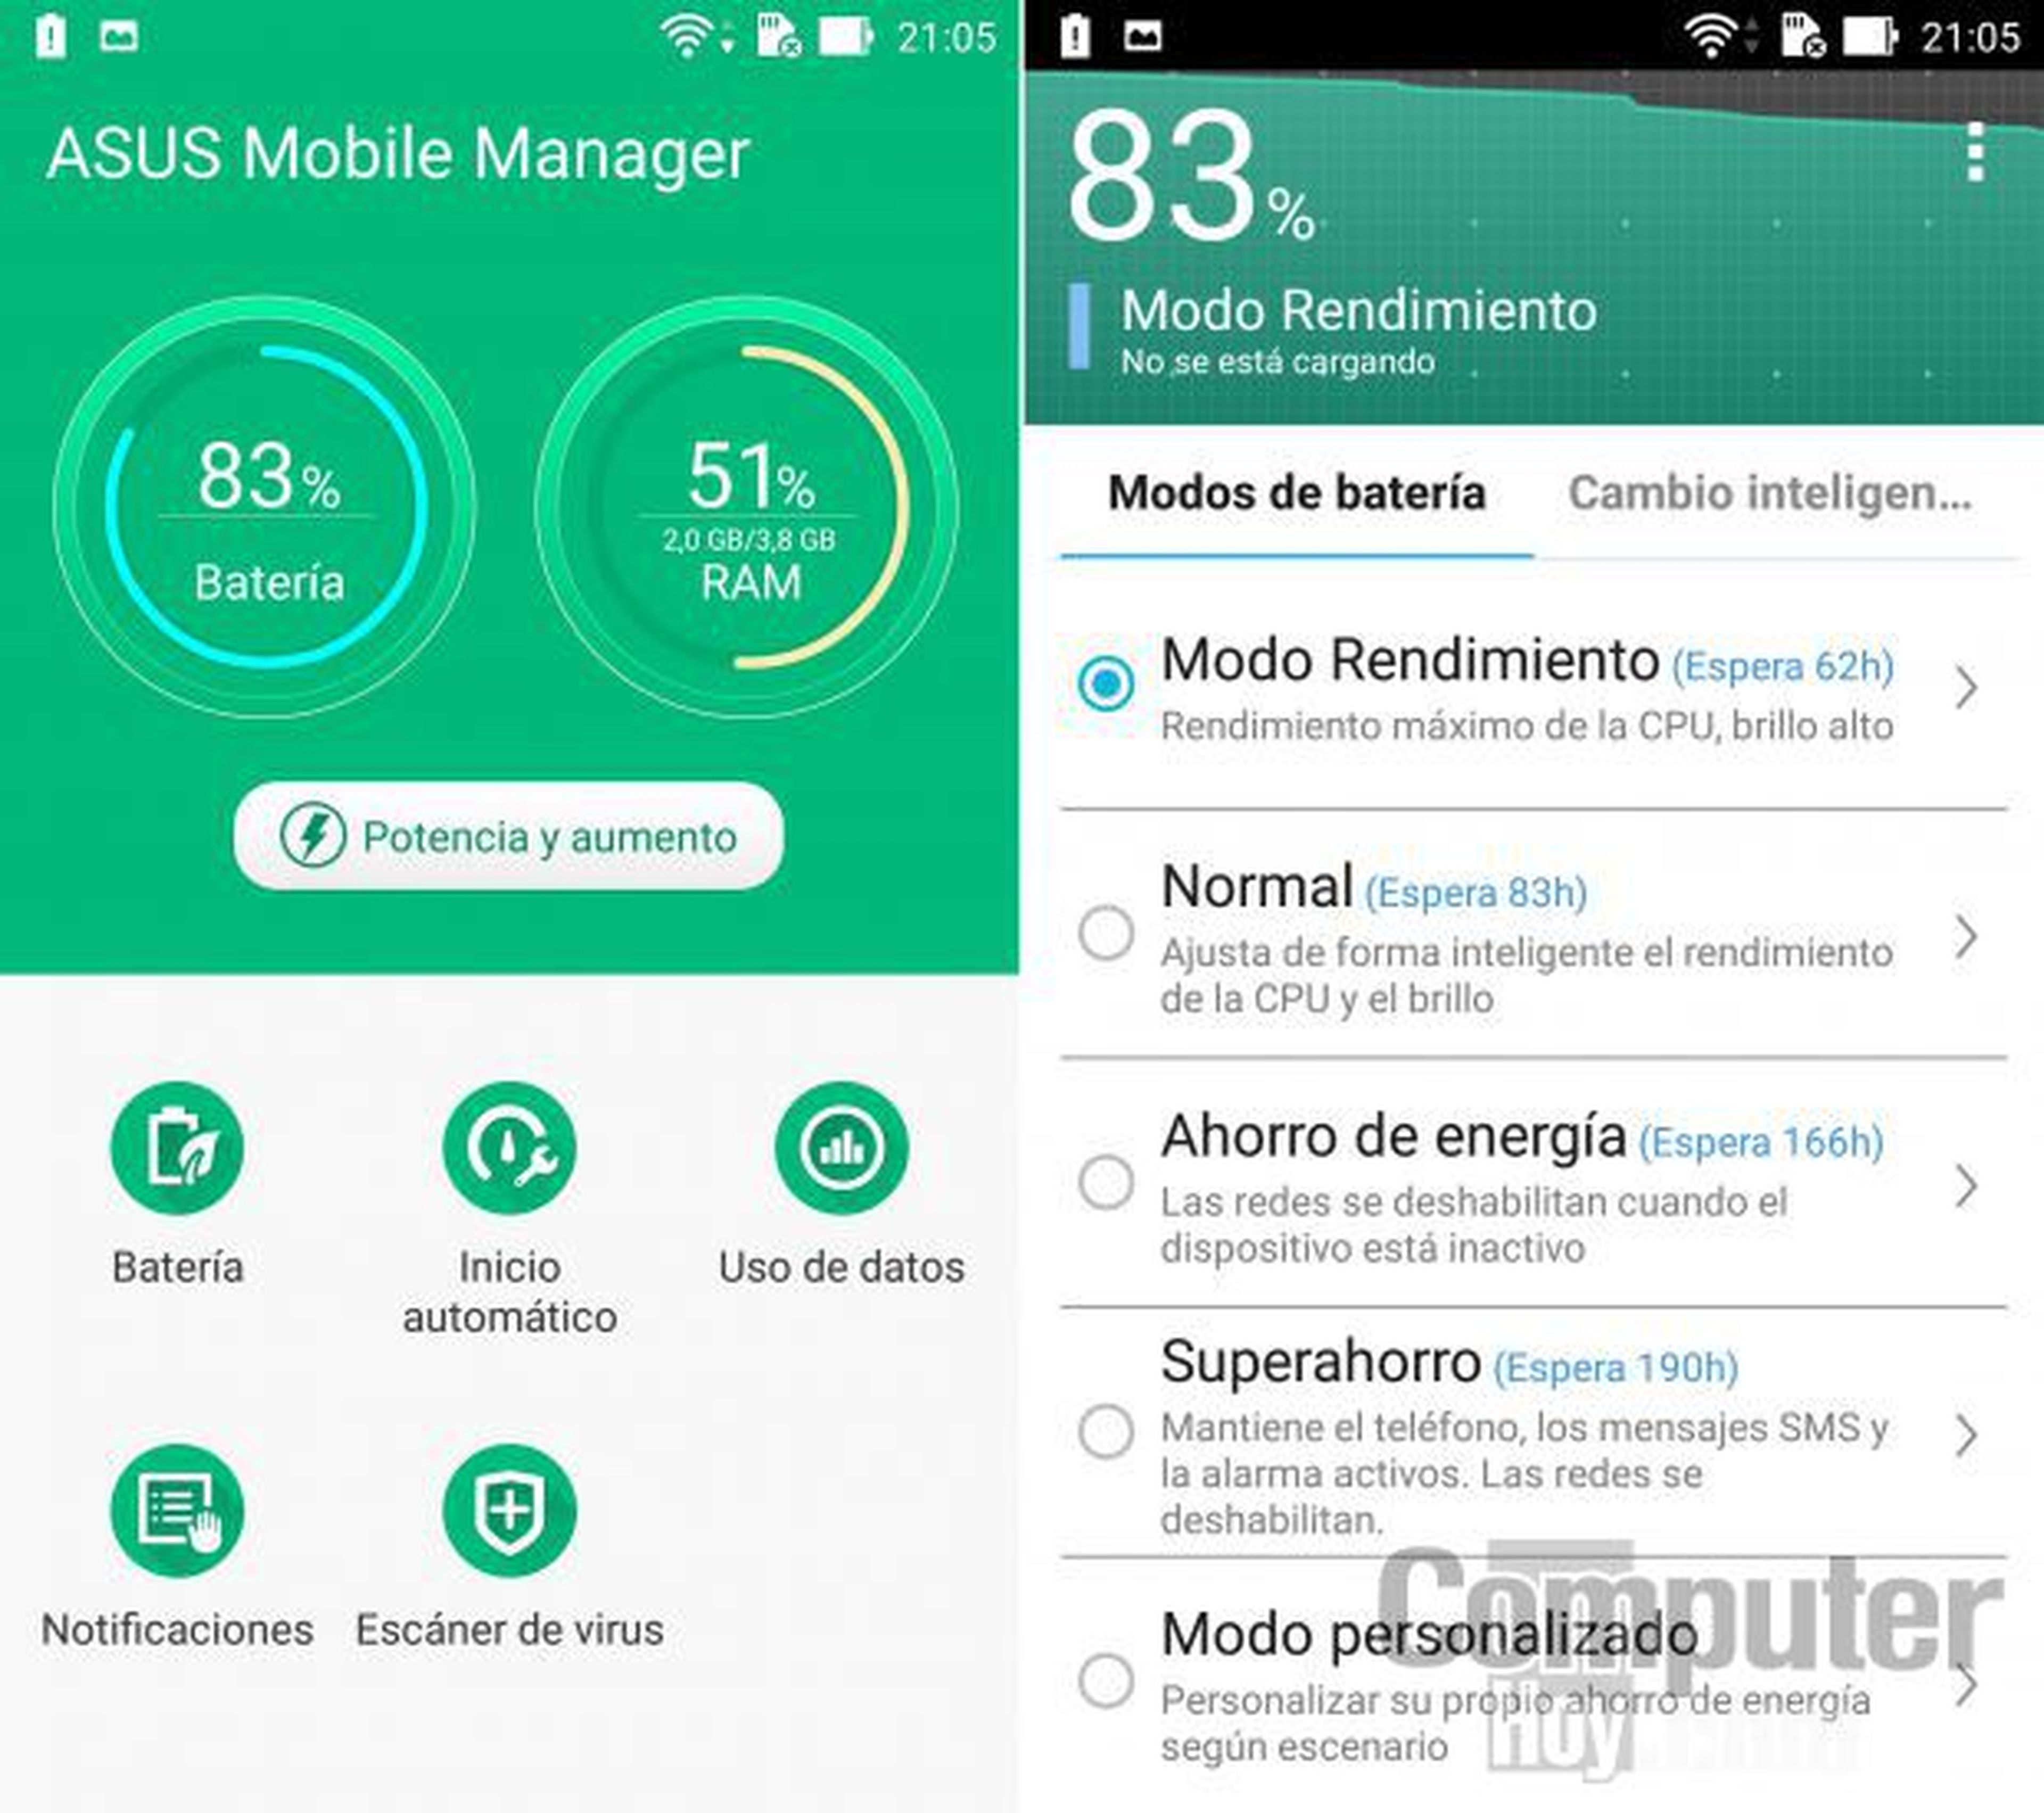 Asus Mobile Manager Asus ZenFone 2 ZE551ML